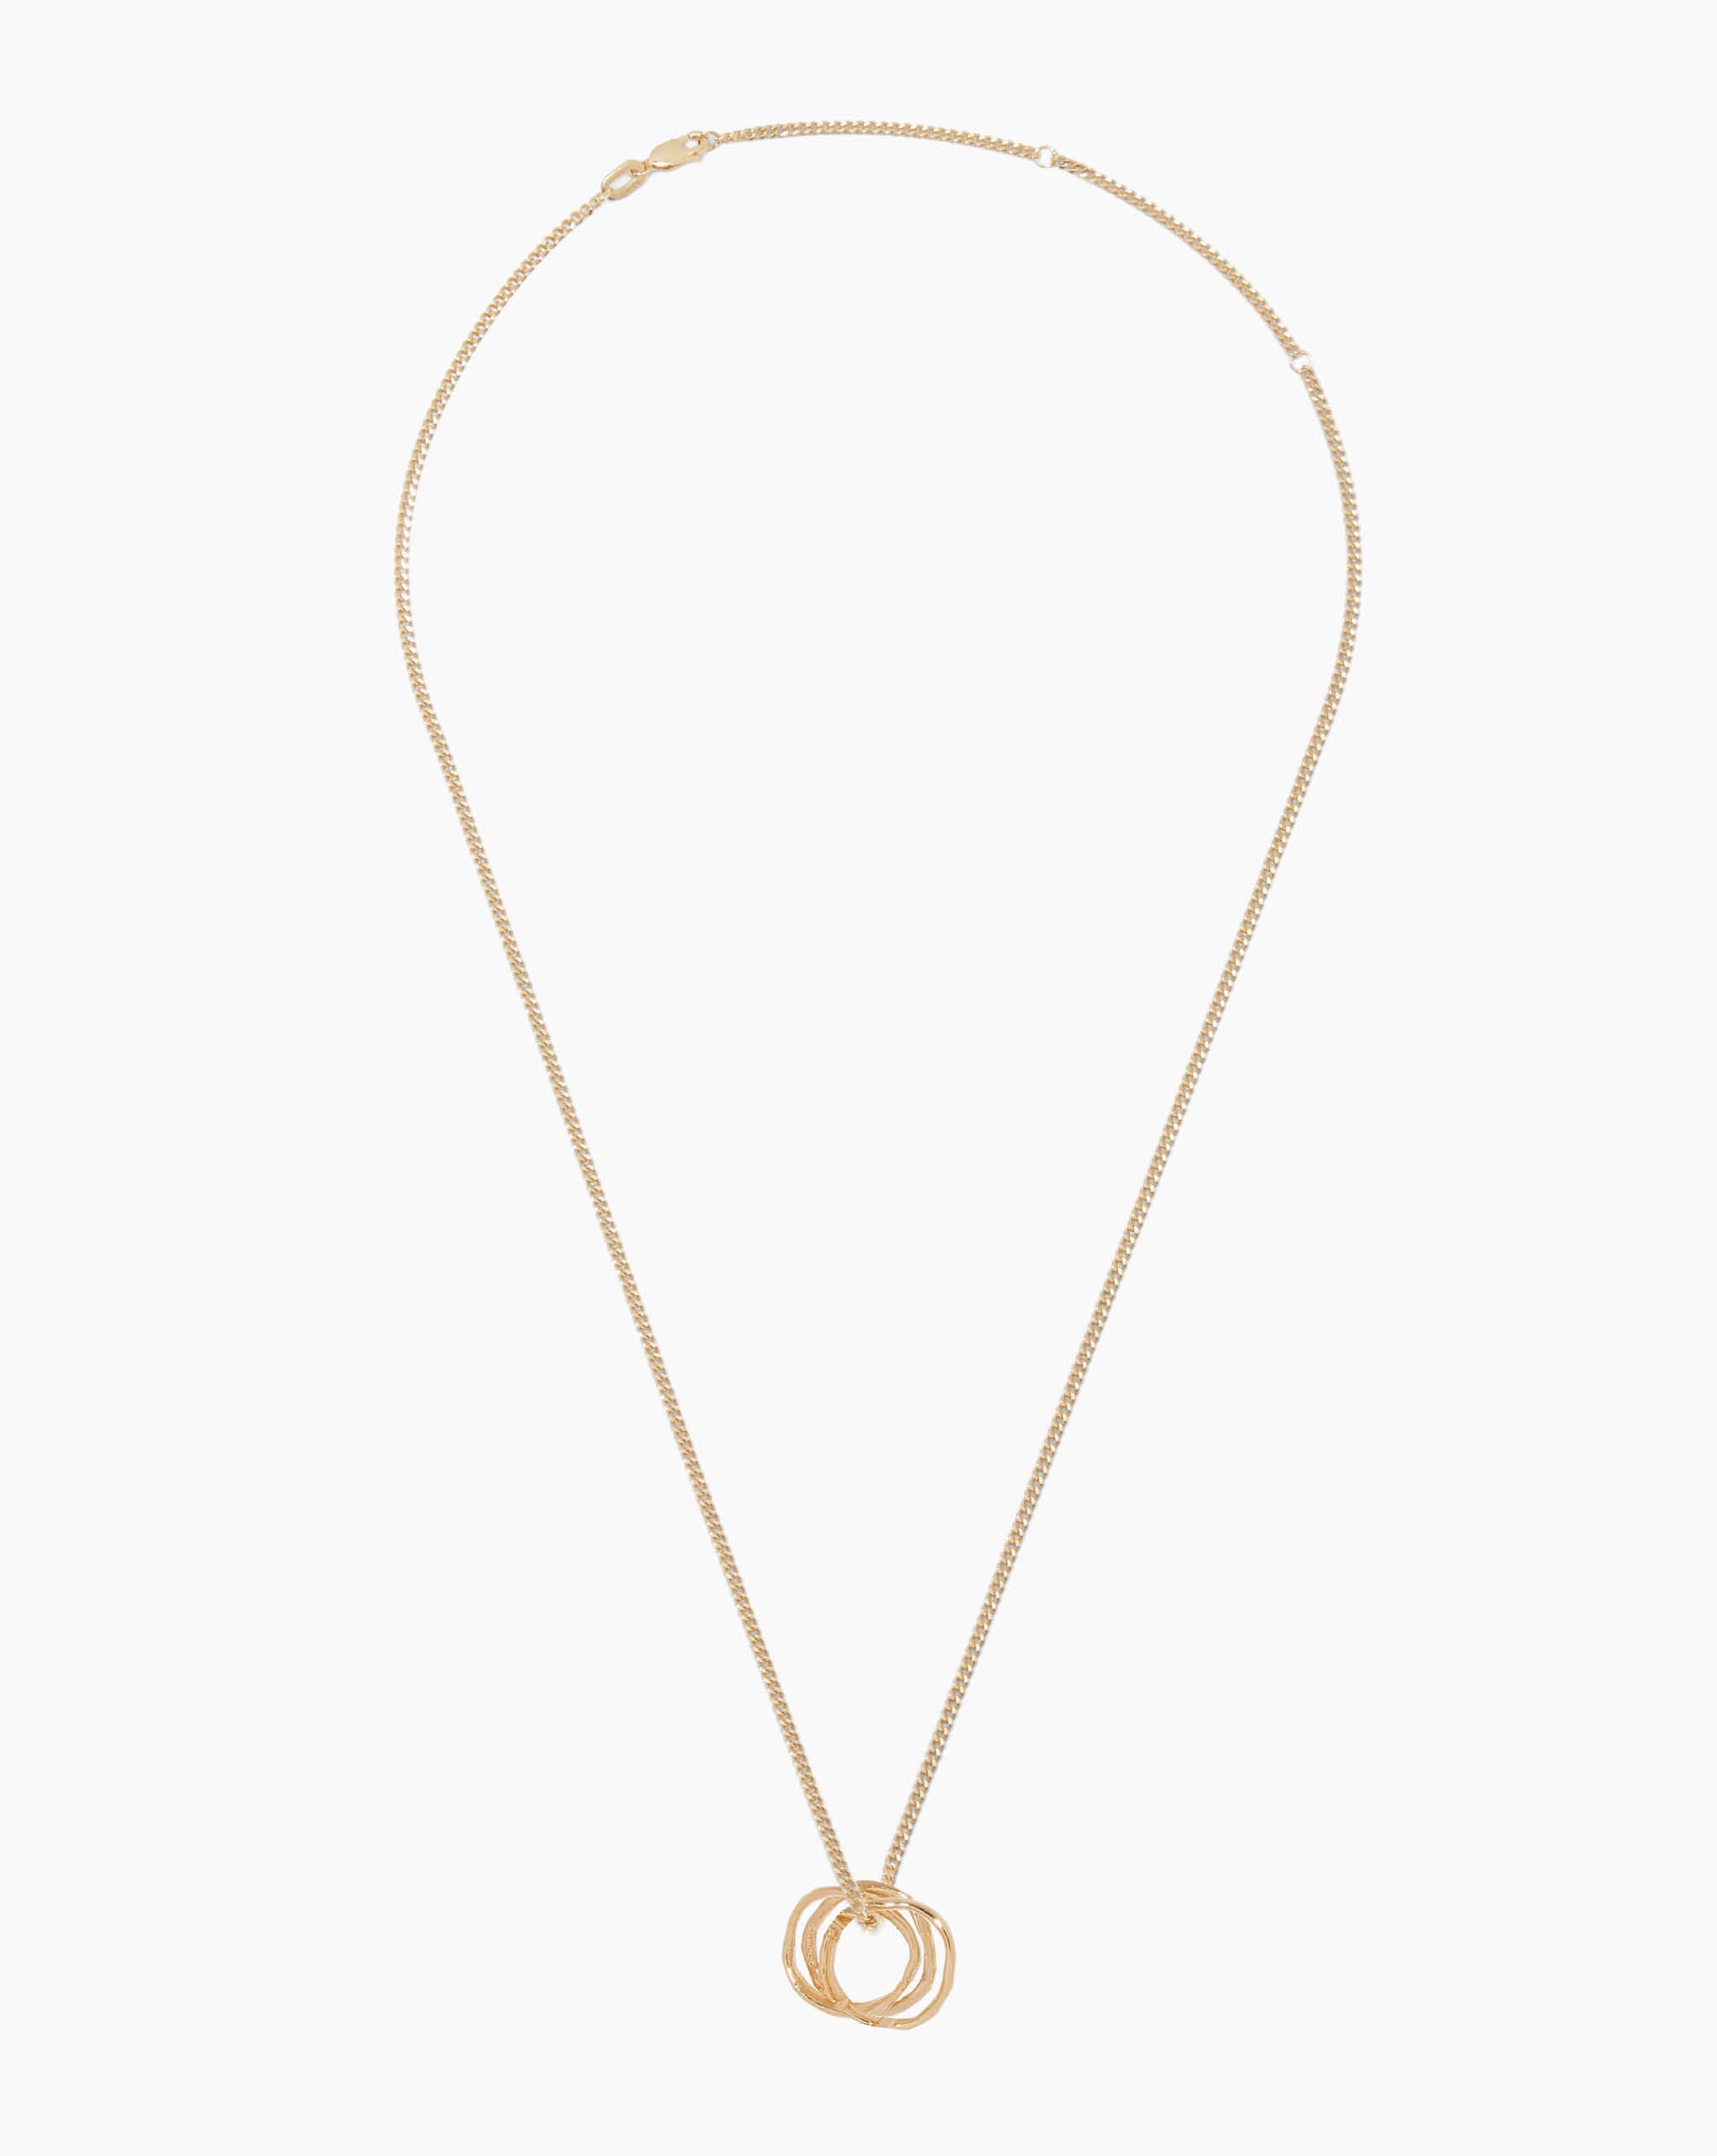 Polly Me Necklace Gold